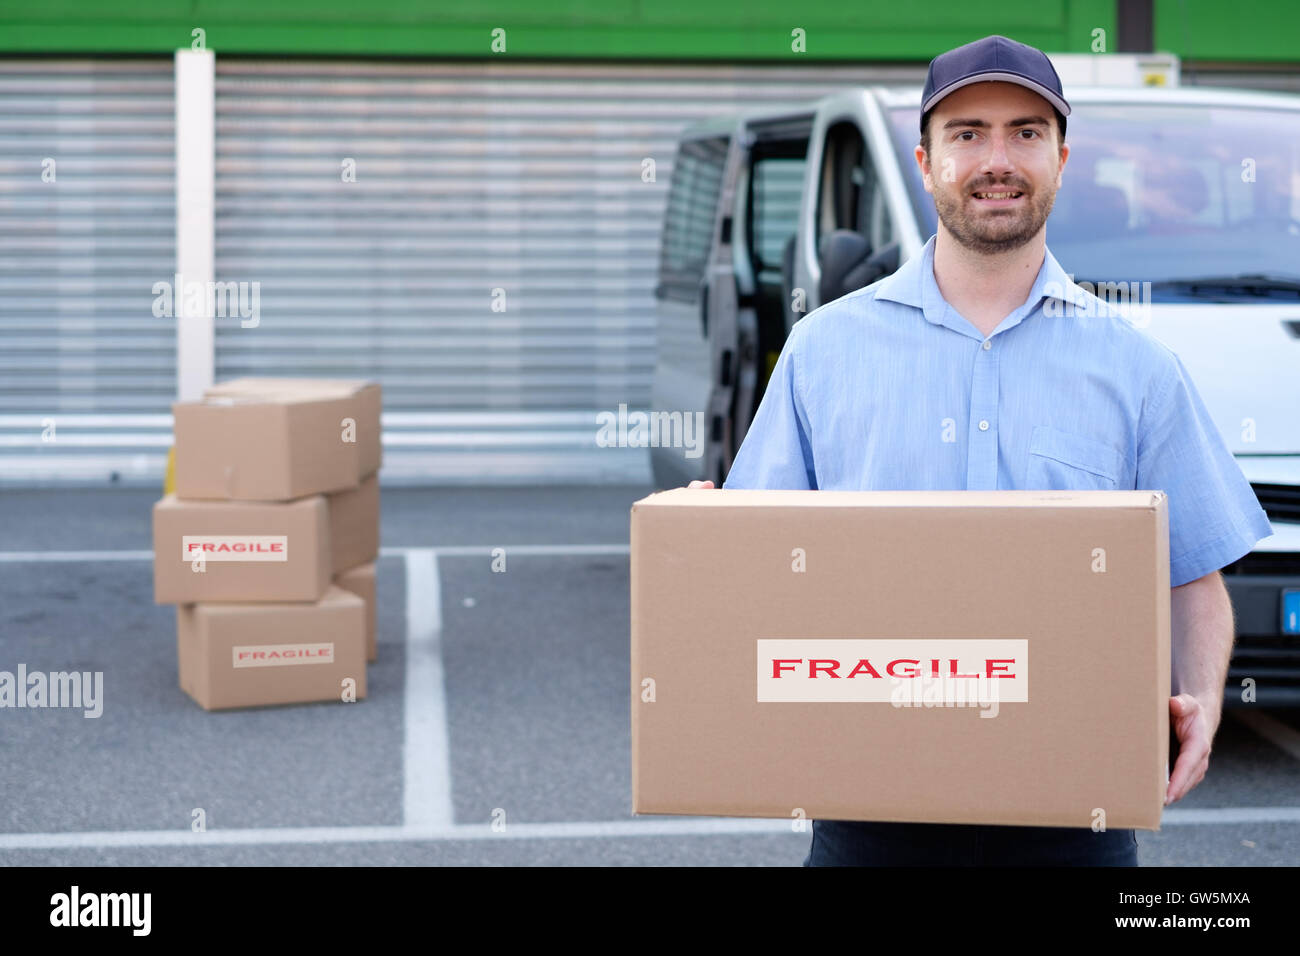 Portrait of confidence express courier next to his delivery van Stock Photo